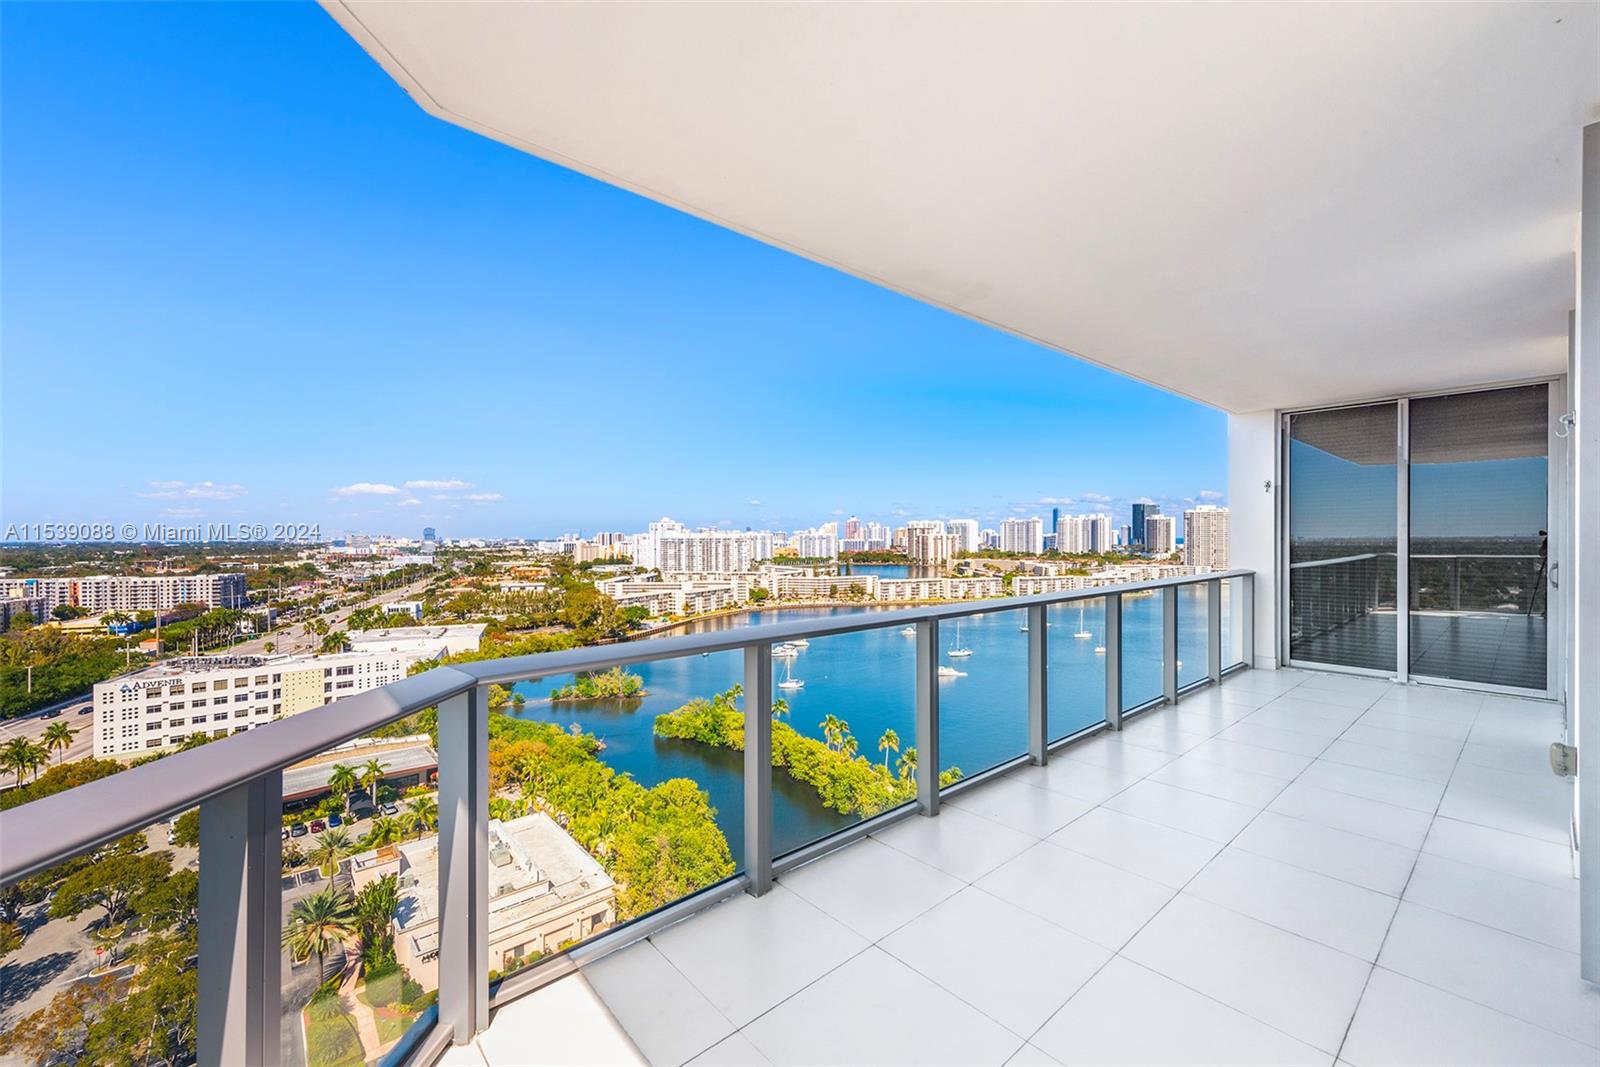 Stunning northwest corner unit, boasting elegance and functionality in every detail. This ready-to-move-in residence offers abundant natural light, featuring 2BR/2.5BA, plus a den/office/media room and laundry room.  Sweeping bay panoramas, capturing the beauty of the Intracoastal Waterways and the mesmerizing city lights stretching into the horizon. Large balcony invites relaxation and top of the line kitchen for hosting and family living.  Motorized drapes enhancing privacy and custom Ornare closets in the bedrooms. Steps from fine dining and the renowned Aventura Mall, as well Sunny Isles and Bal Harbour.  Indulge in 5-star amenities including a state-of-the-art gym, spa, pool deck, kids play area, café and more.  For boaters, the adjacent marina offers convenient access for your yacht!